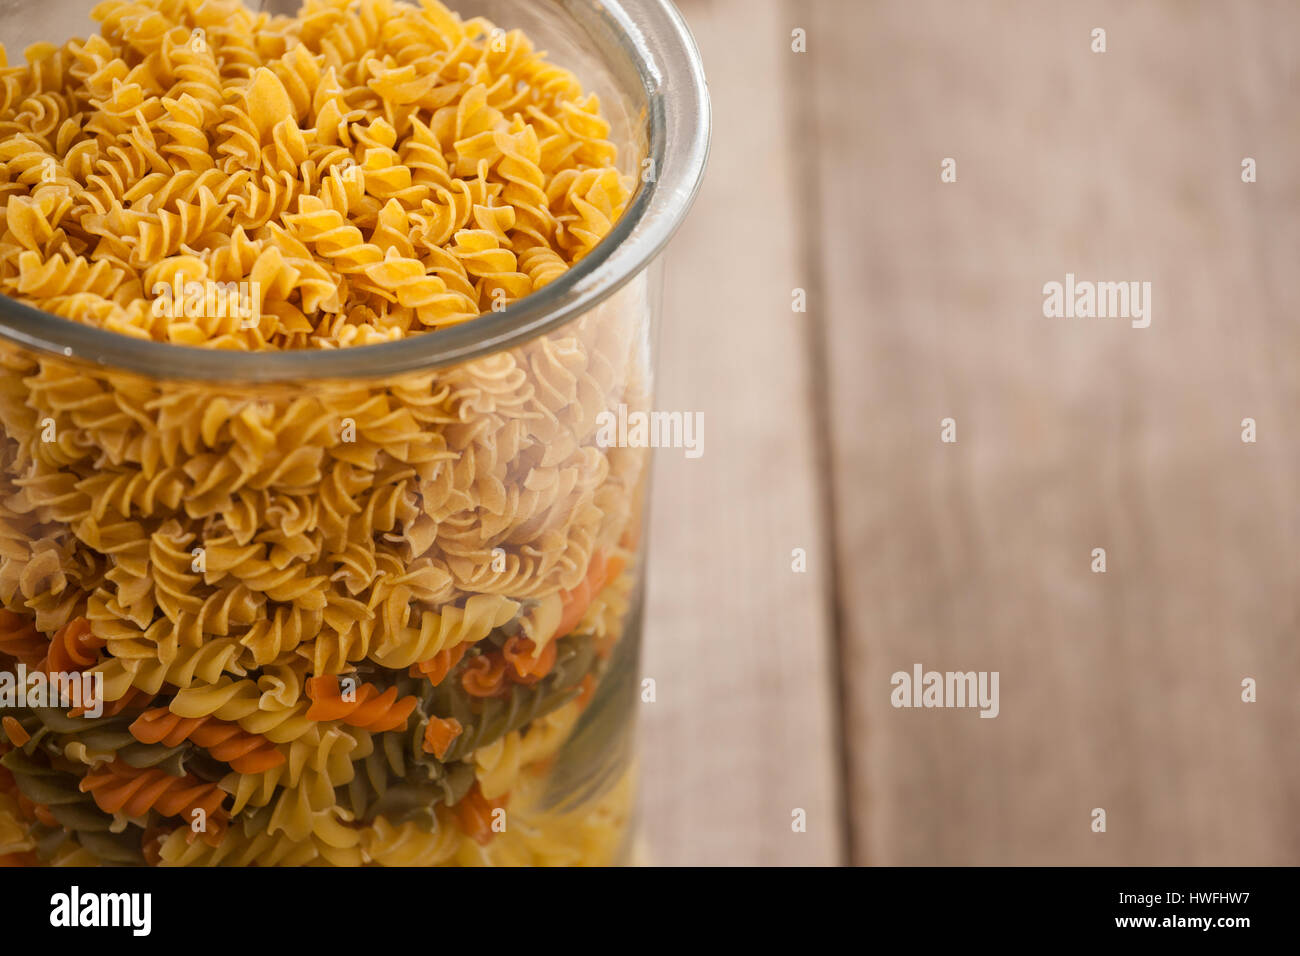 Girandole pasta in a glass container on wooden table Stock Photo